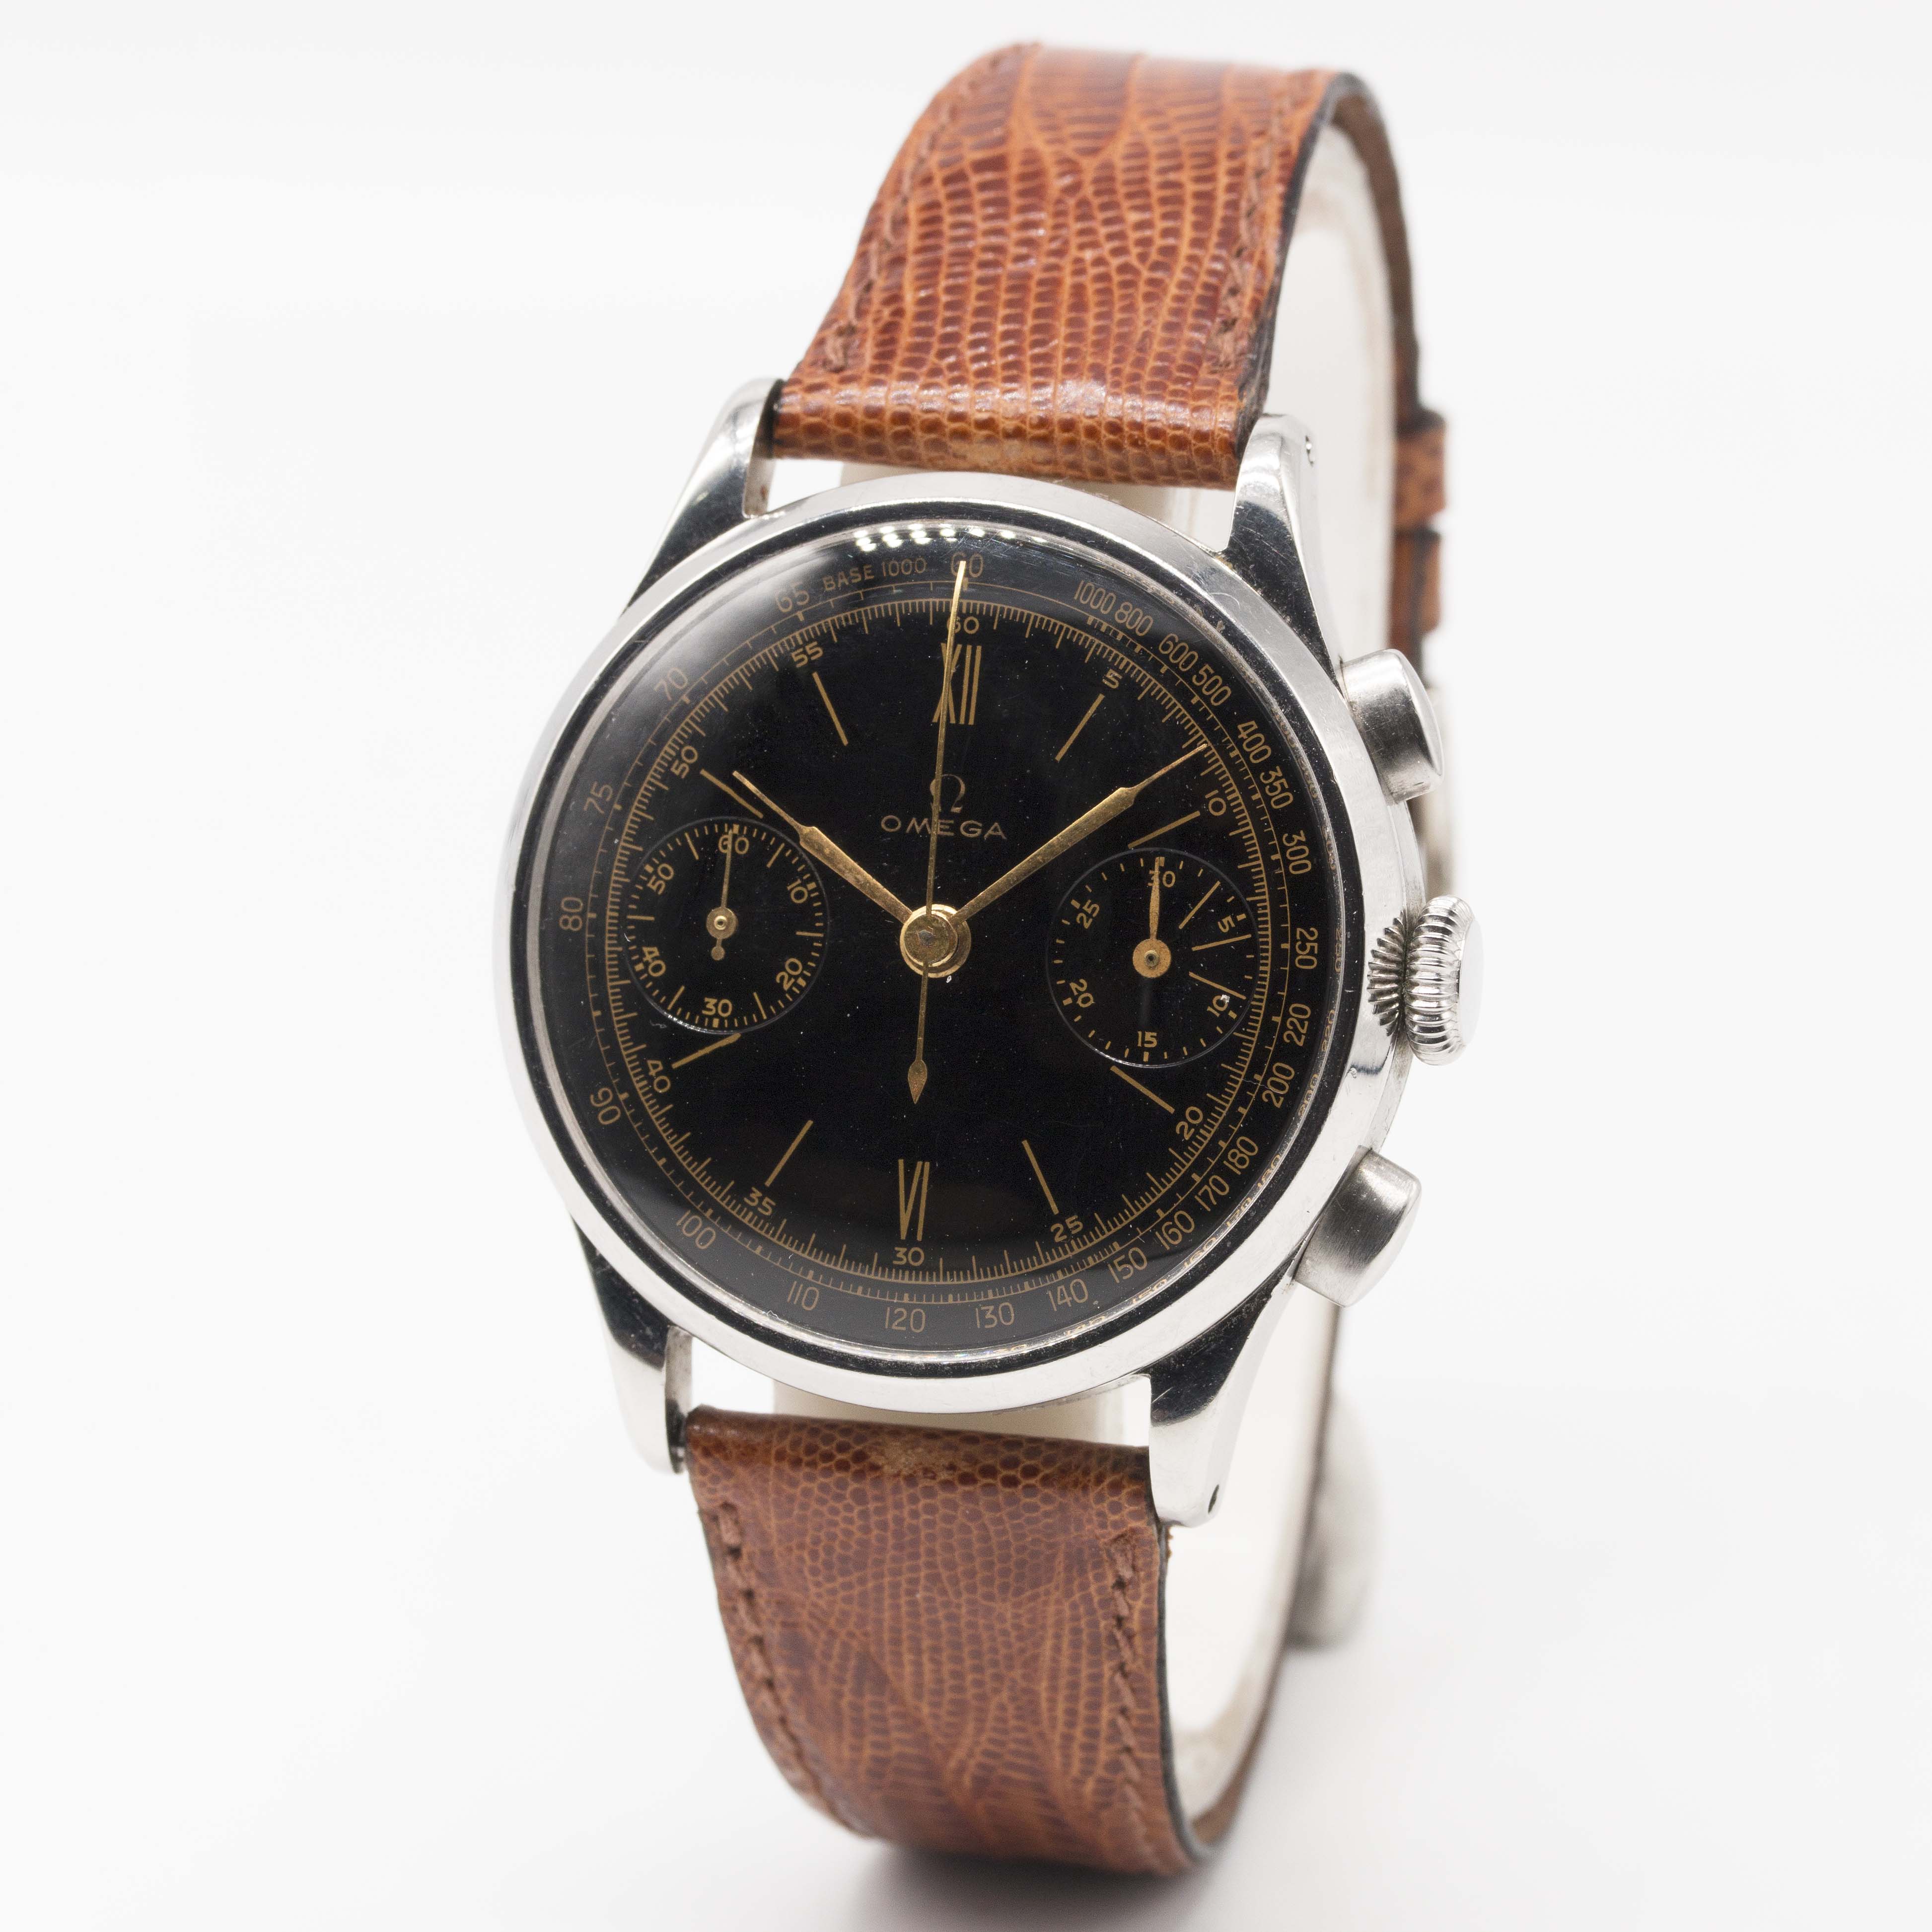 A VERY RARE GENTLEMAN'S LARGE SIZE STAINLESS STEEL OMEGA "33.3" CHRONOGRAPH WRIST WATCH CIRCA - Image 5 of 11